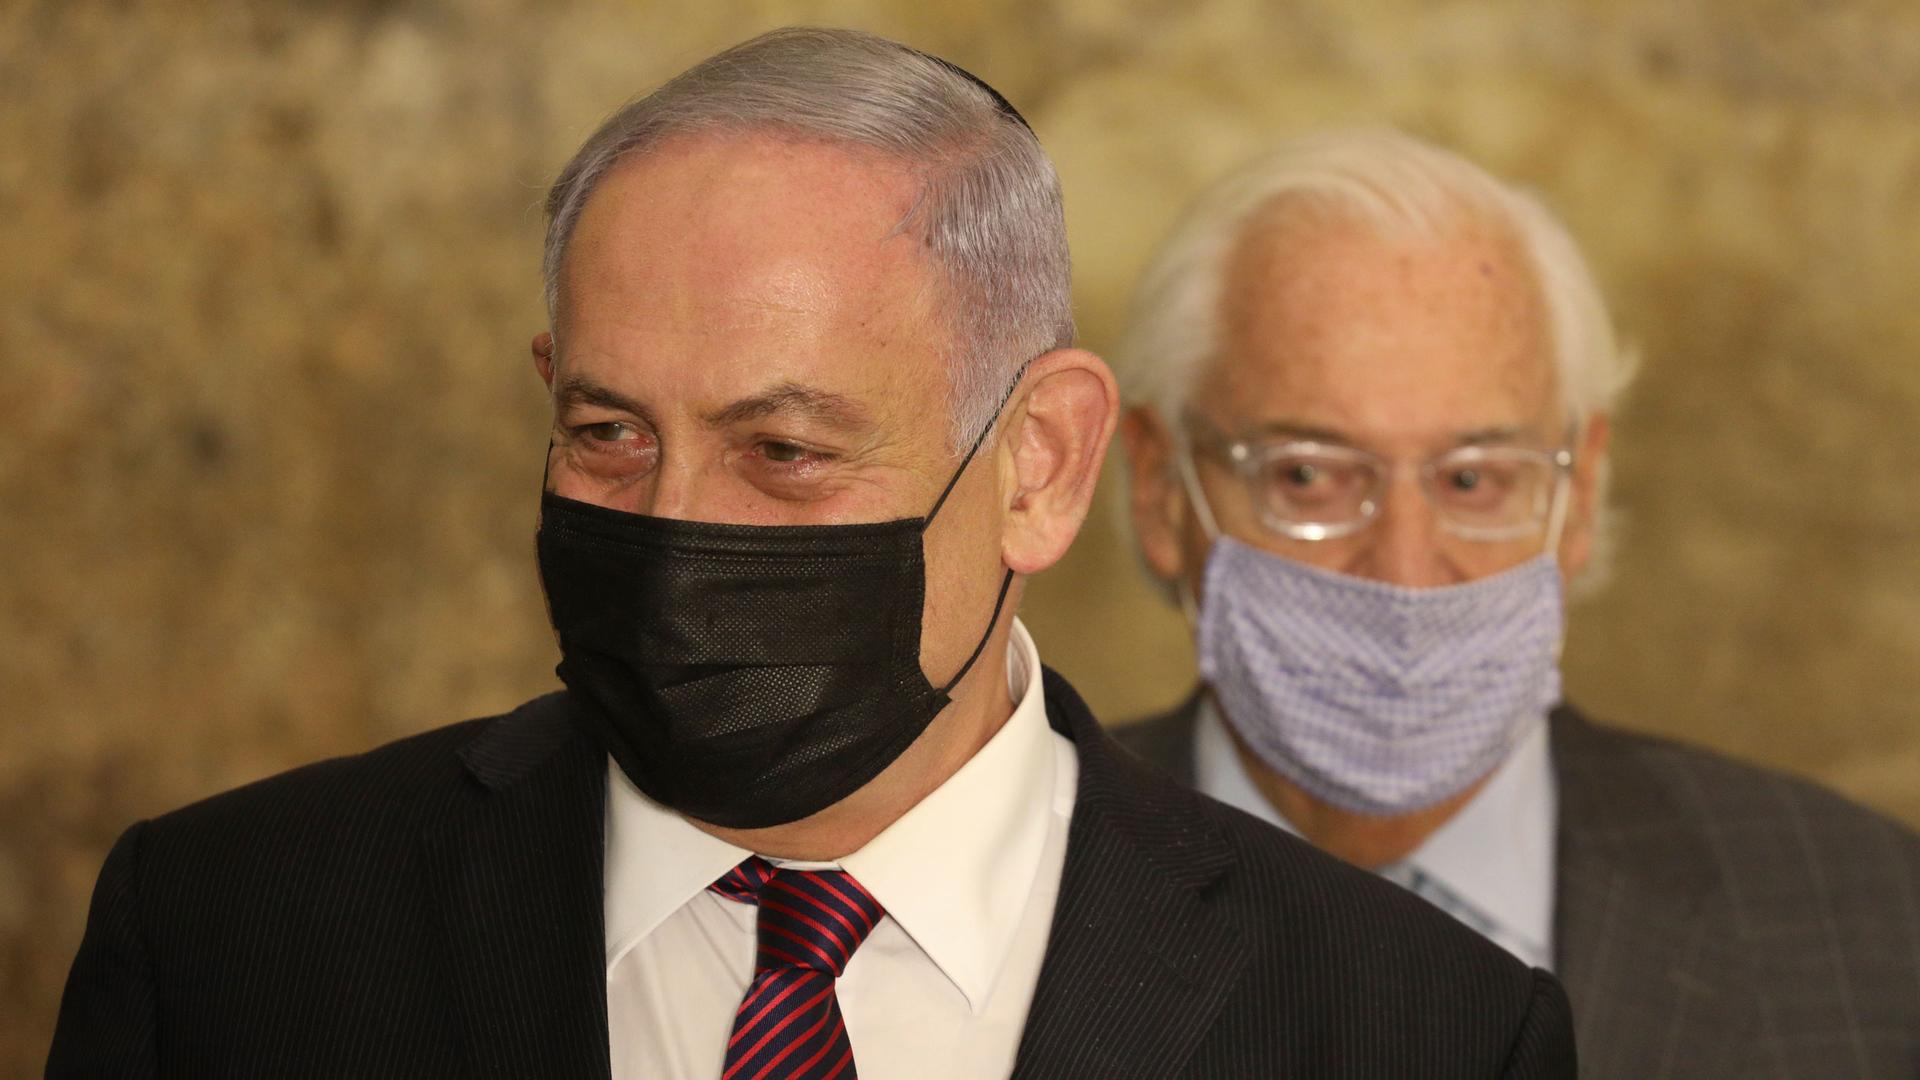 Israeli Prime Minister Benjamin Netanyahu is shown wearing a face mask and suit with US Ambassador to Israel David Friedman standing behind him.